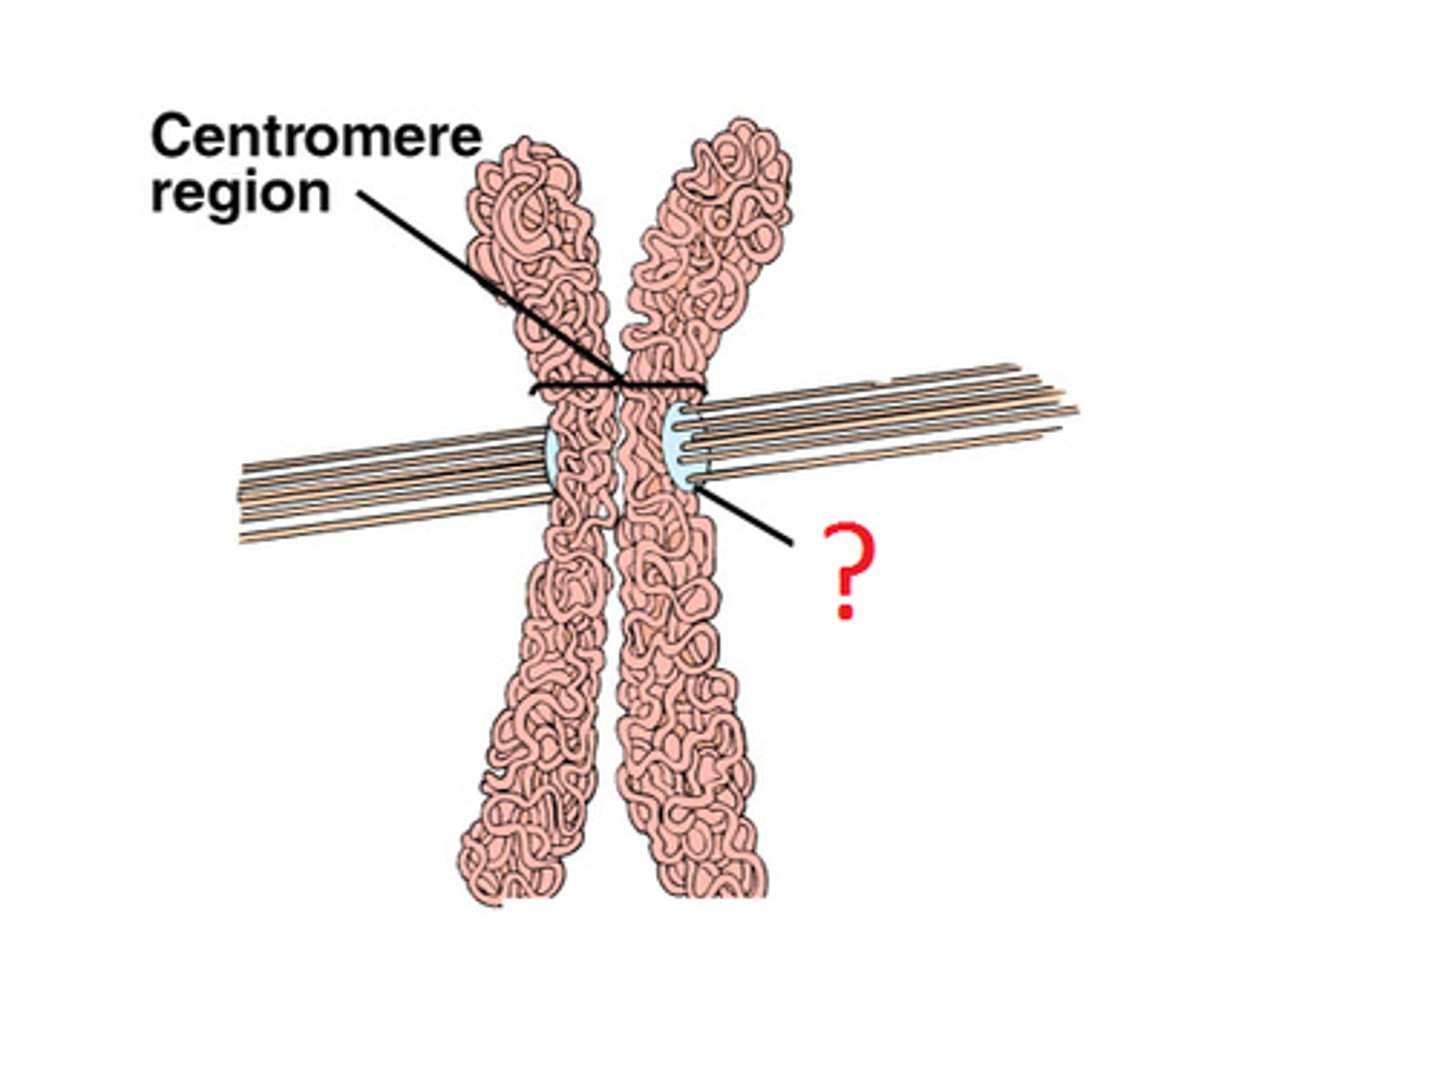 <p>A structure within the centromere containing the motor protein dynein. Moves the chromosomes apart during anaphase.</p>